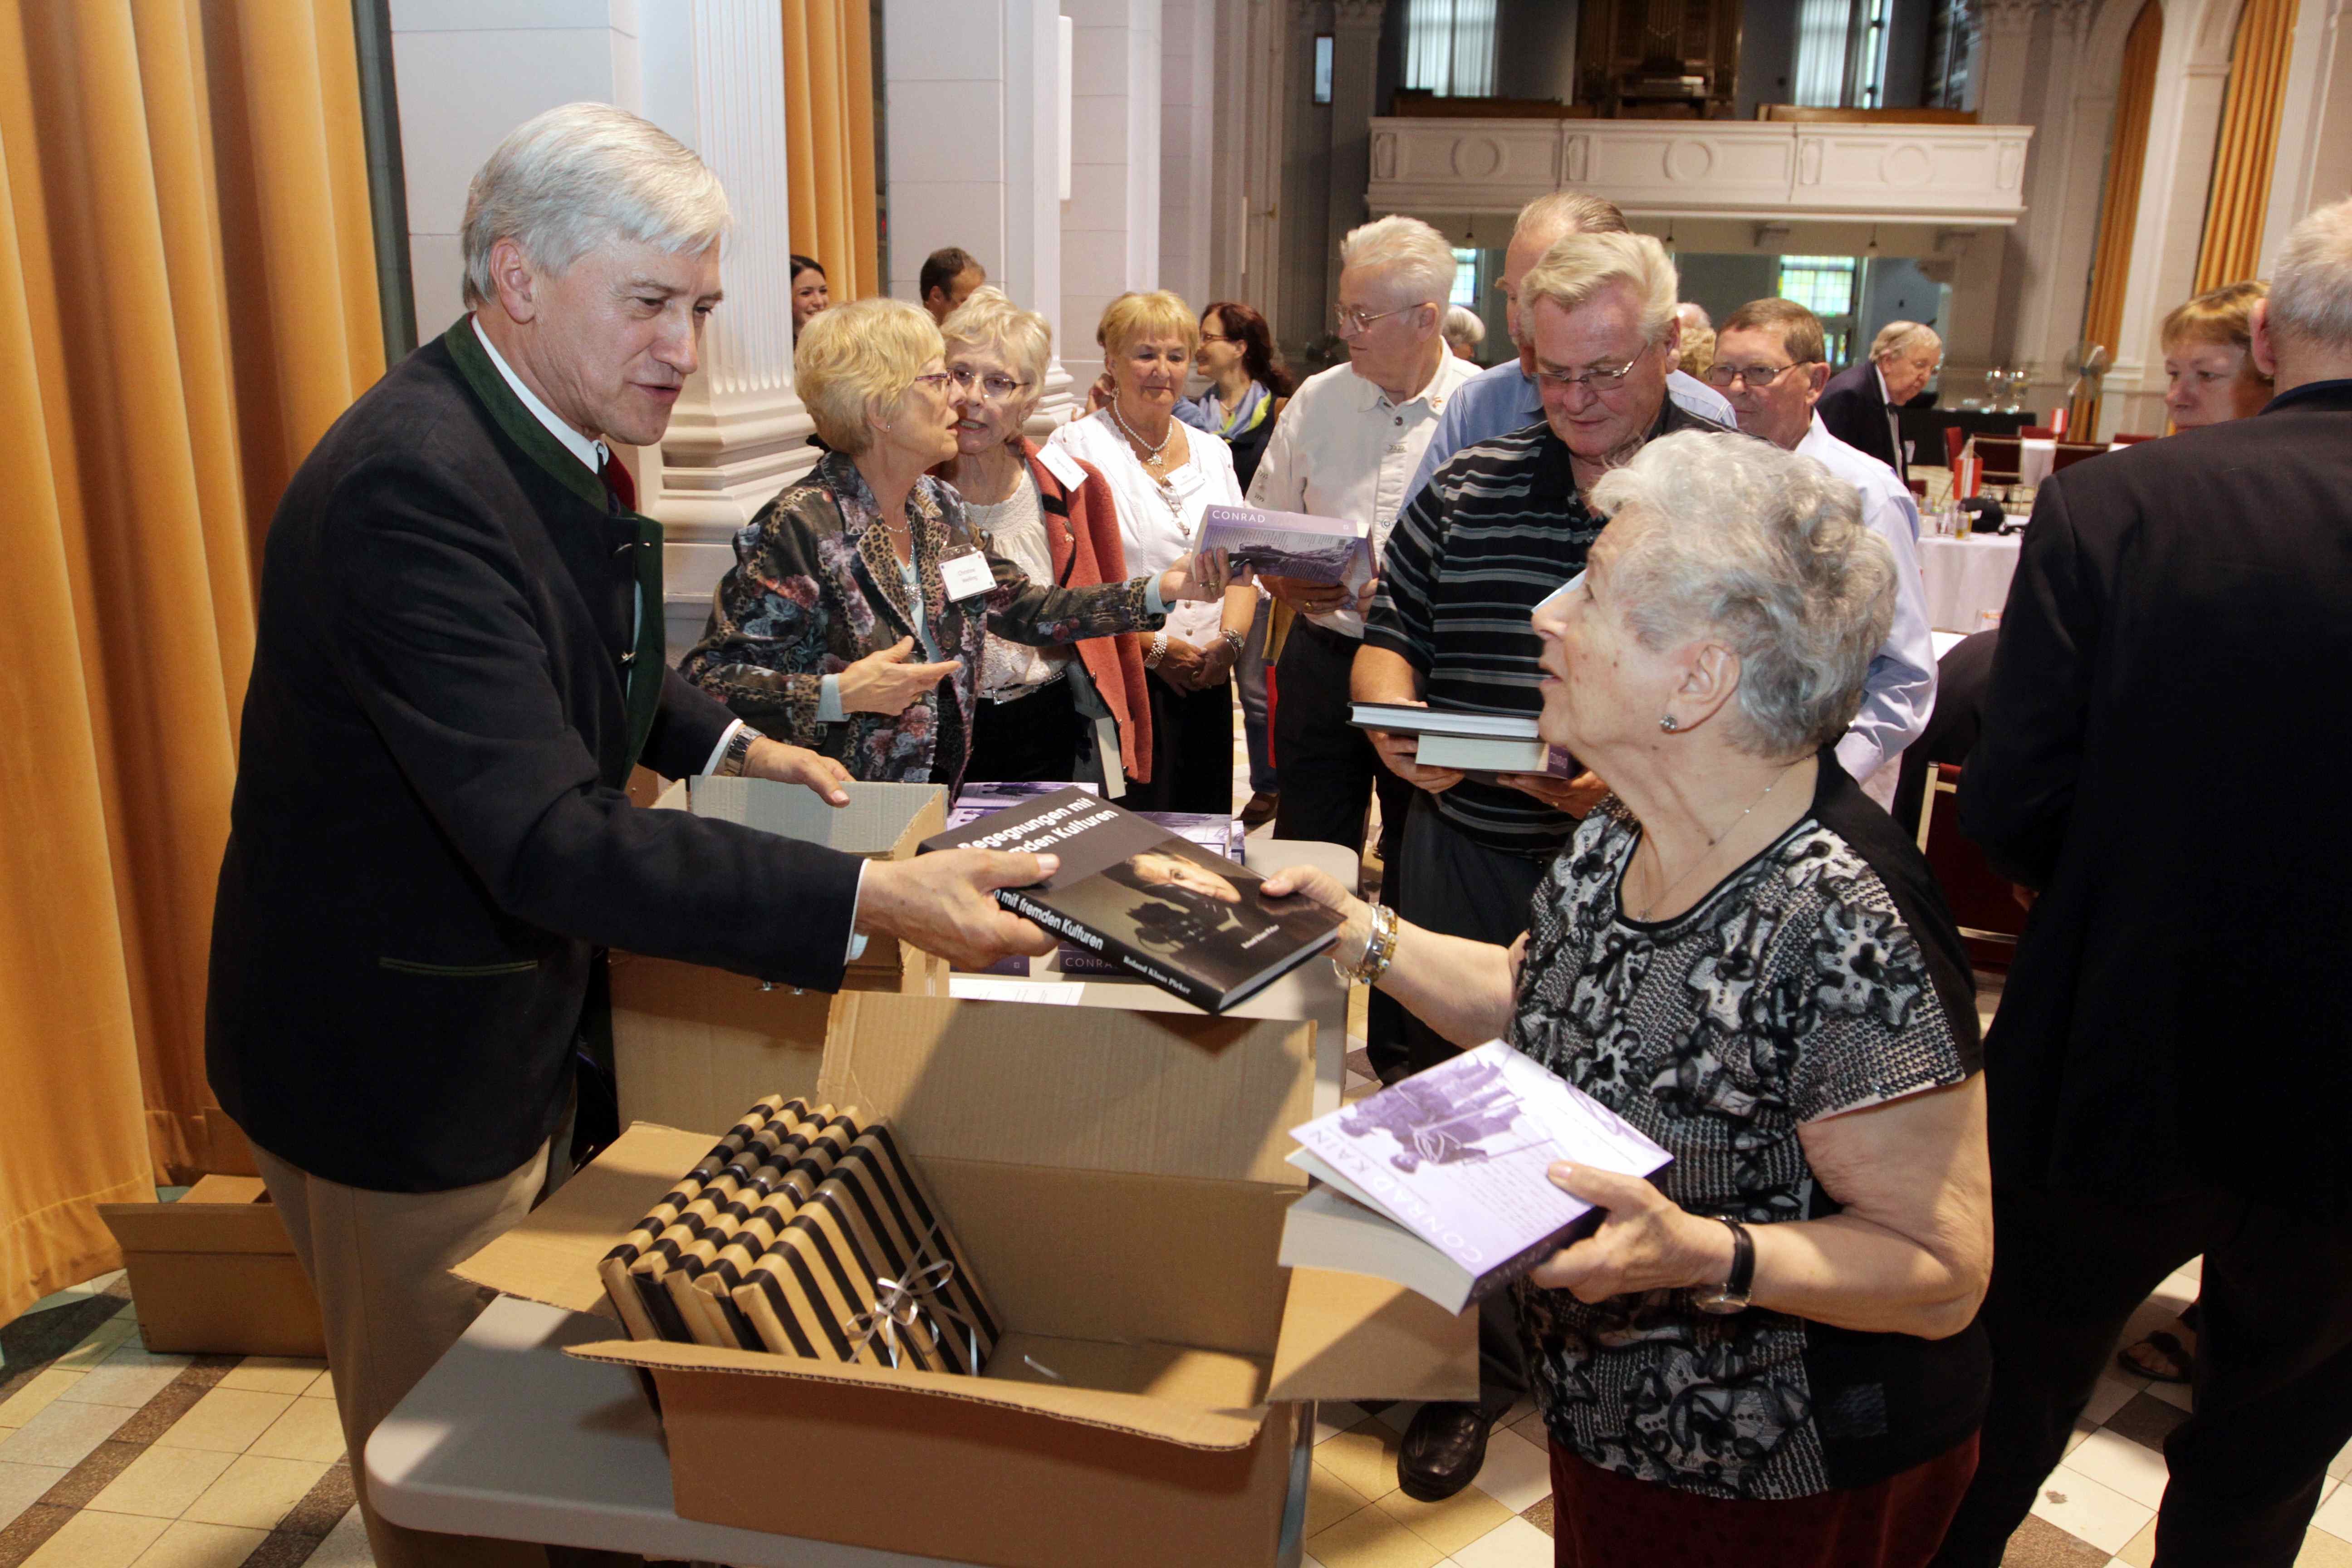 Roland Pirker and Christine Welling distribute copies of books by Conrad Kain and Roland Pirker